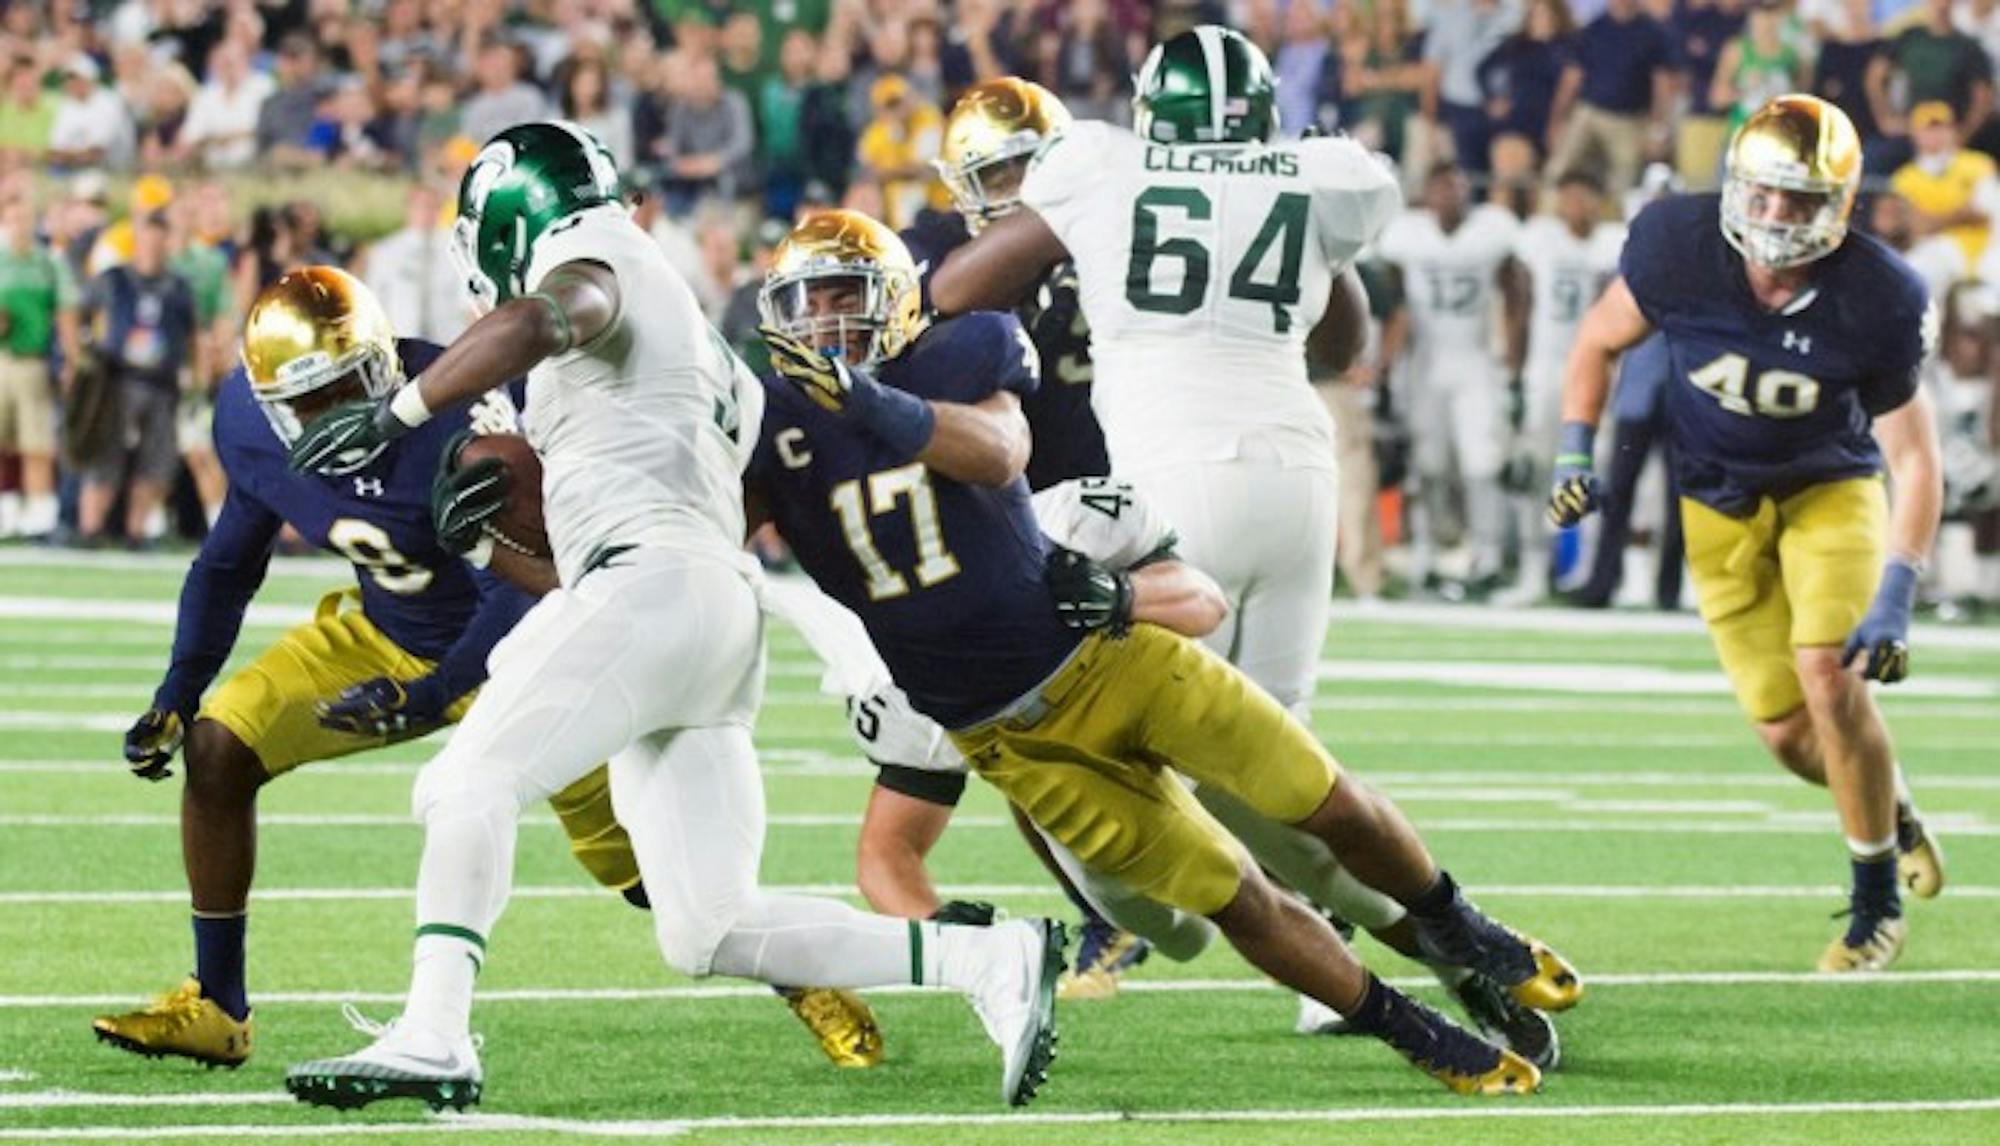 Senior linebacker James Onwaulu tackles the ball carrier during Notre Dame's 36-28 loss to Michigan State on Saturday.